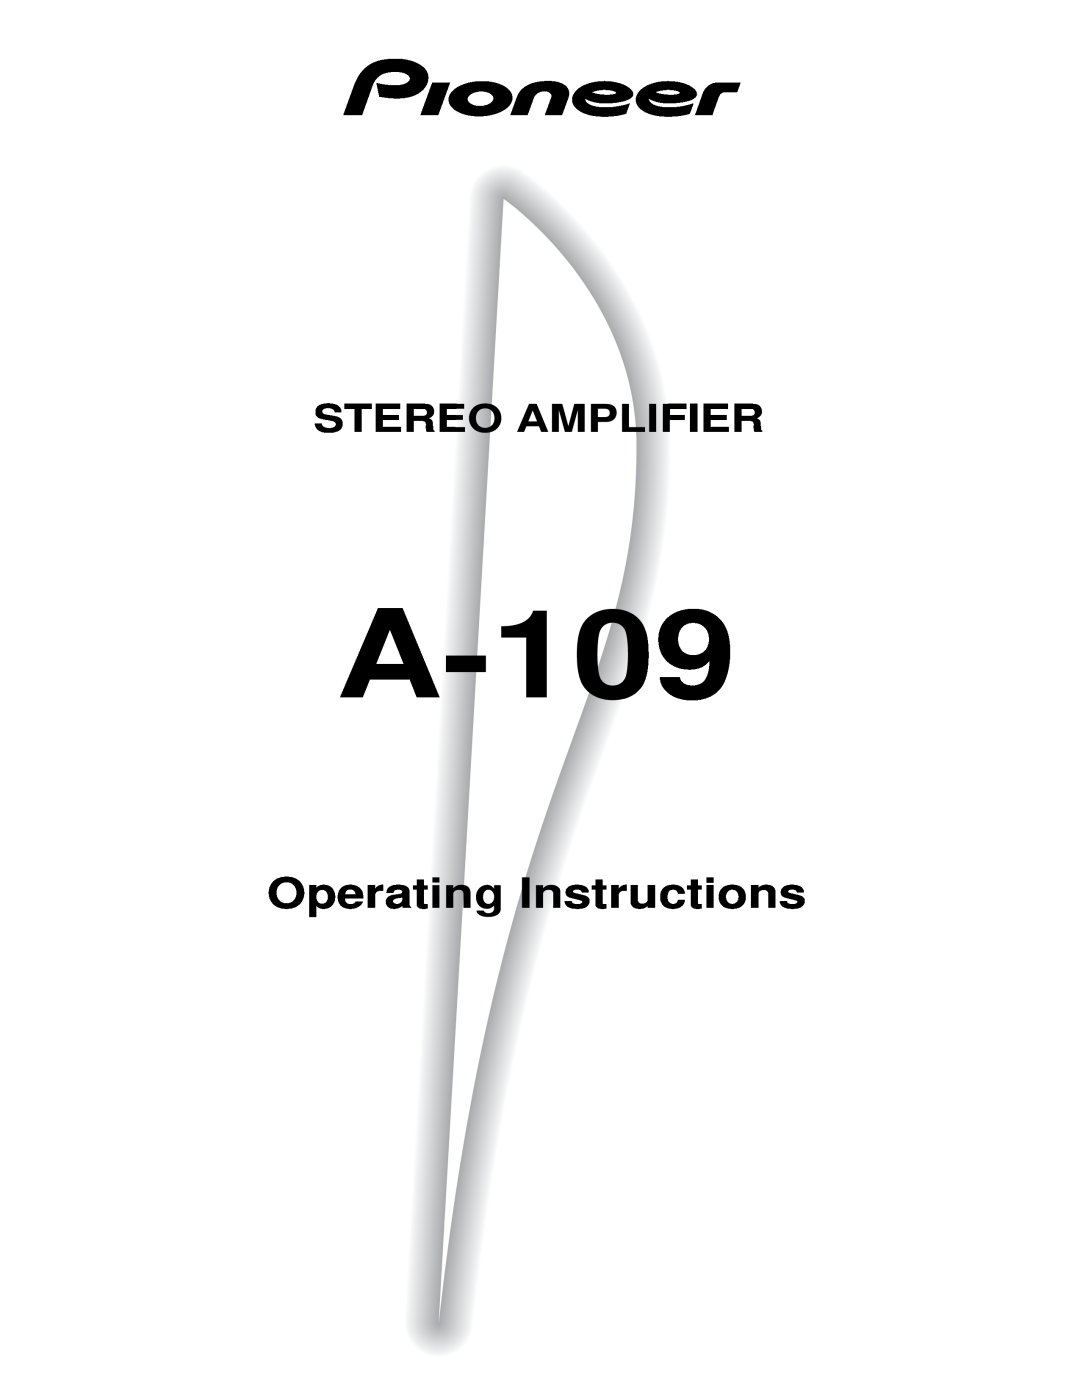 Pioneer A-109 manual Operating Instructions, Stereo Amplifier 